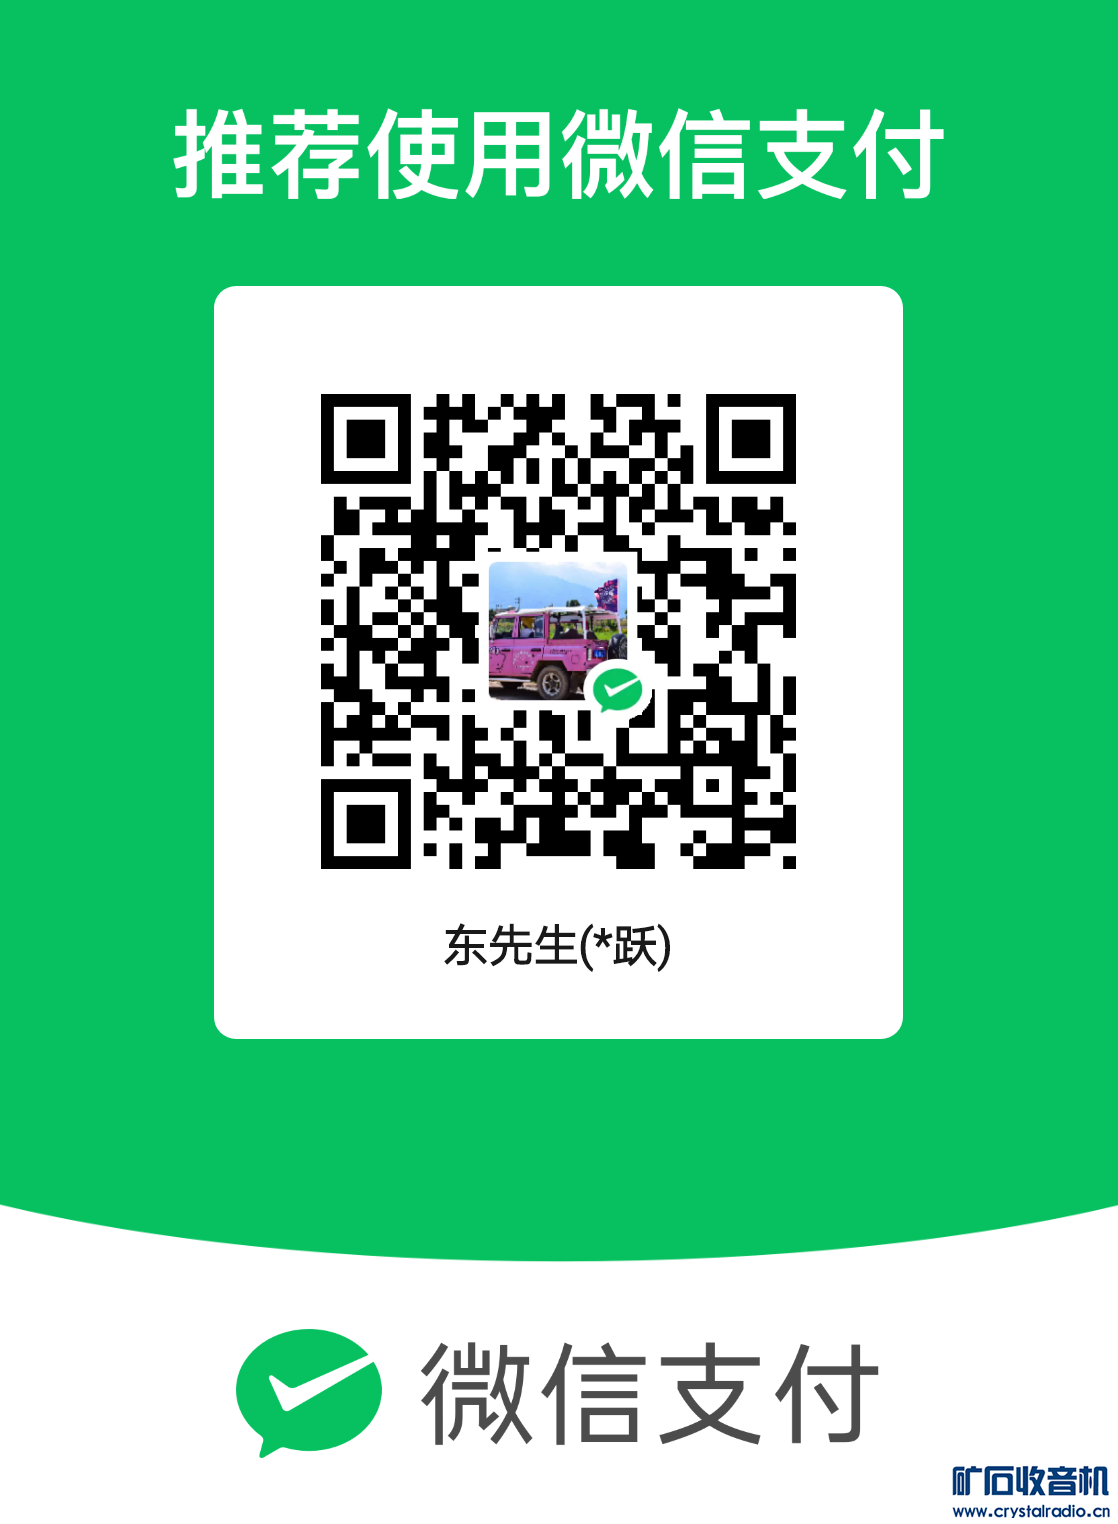 mm_facetoface_collect_qrcode_1686984295236.png